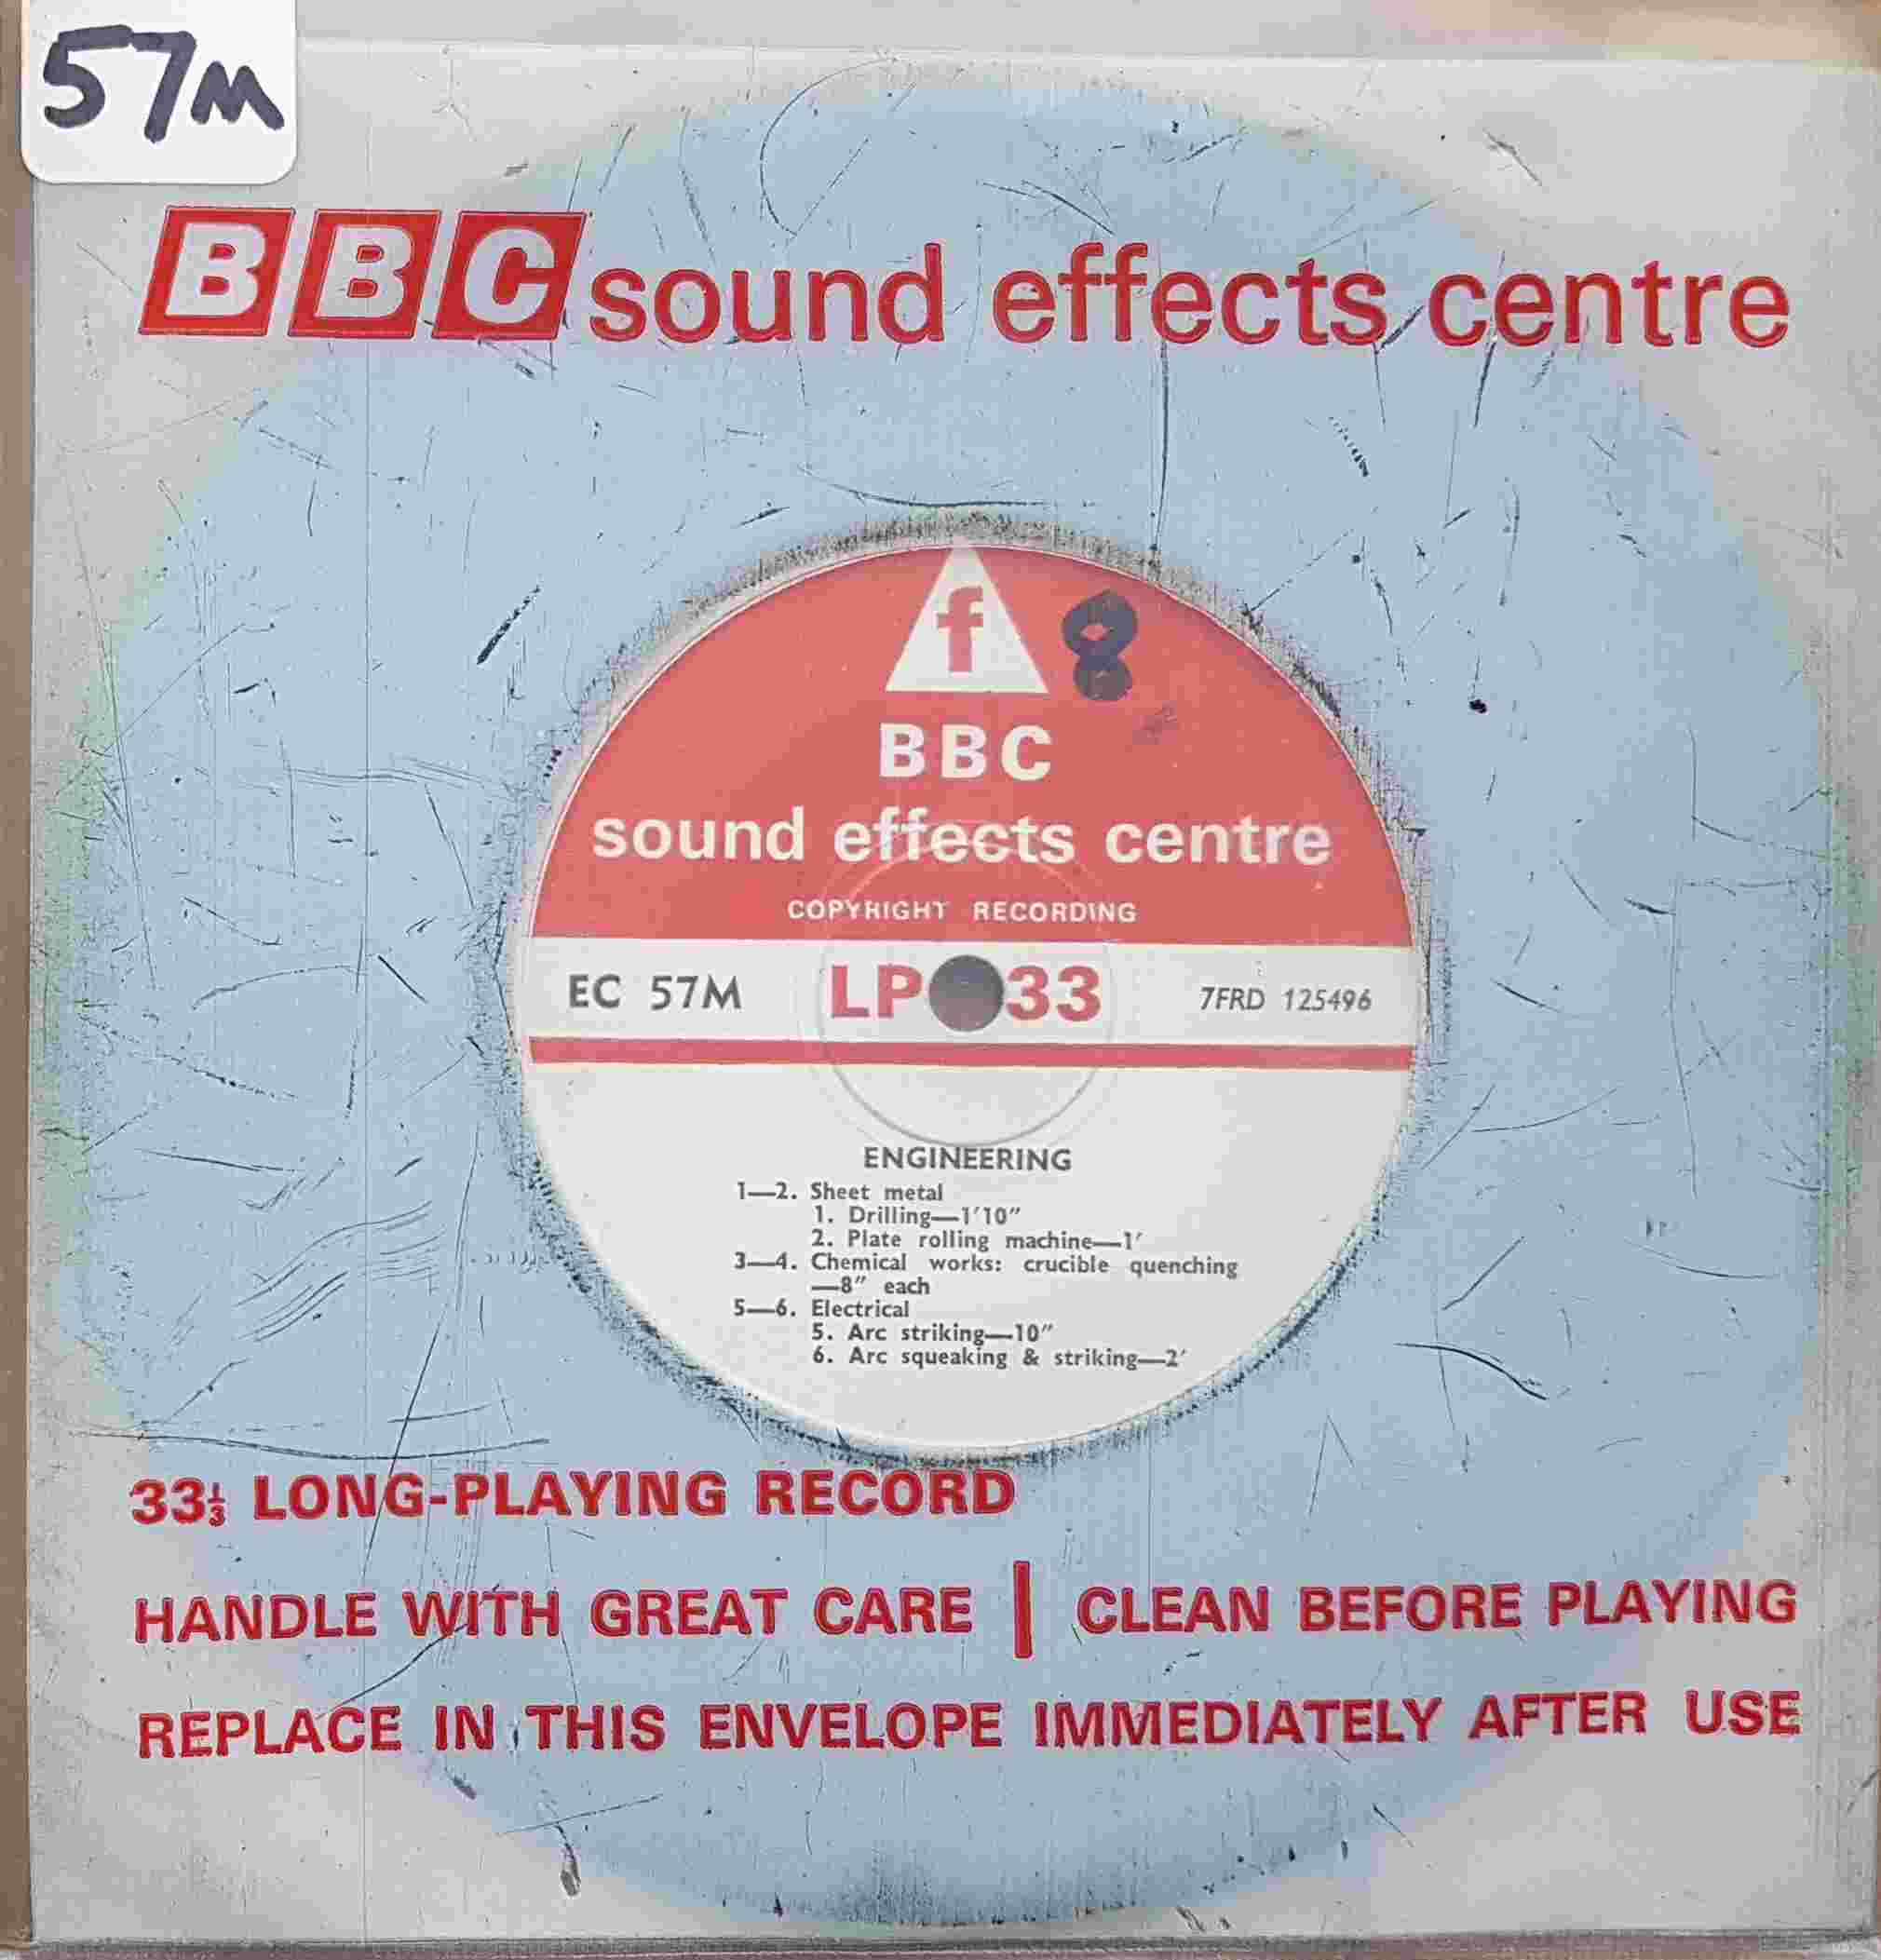 Picture of EC 57M Engineering by artist Not registered from the BBC singles - Records and Tapes library